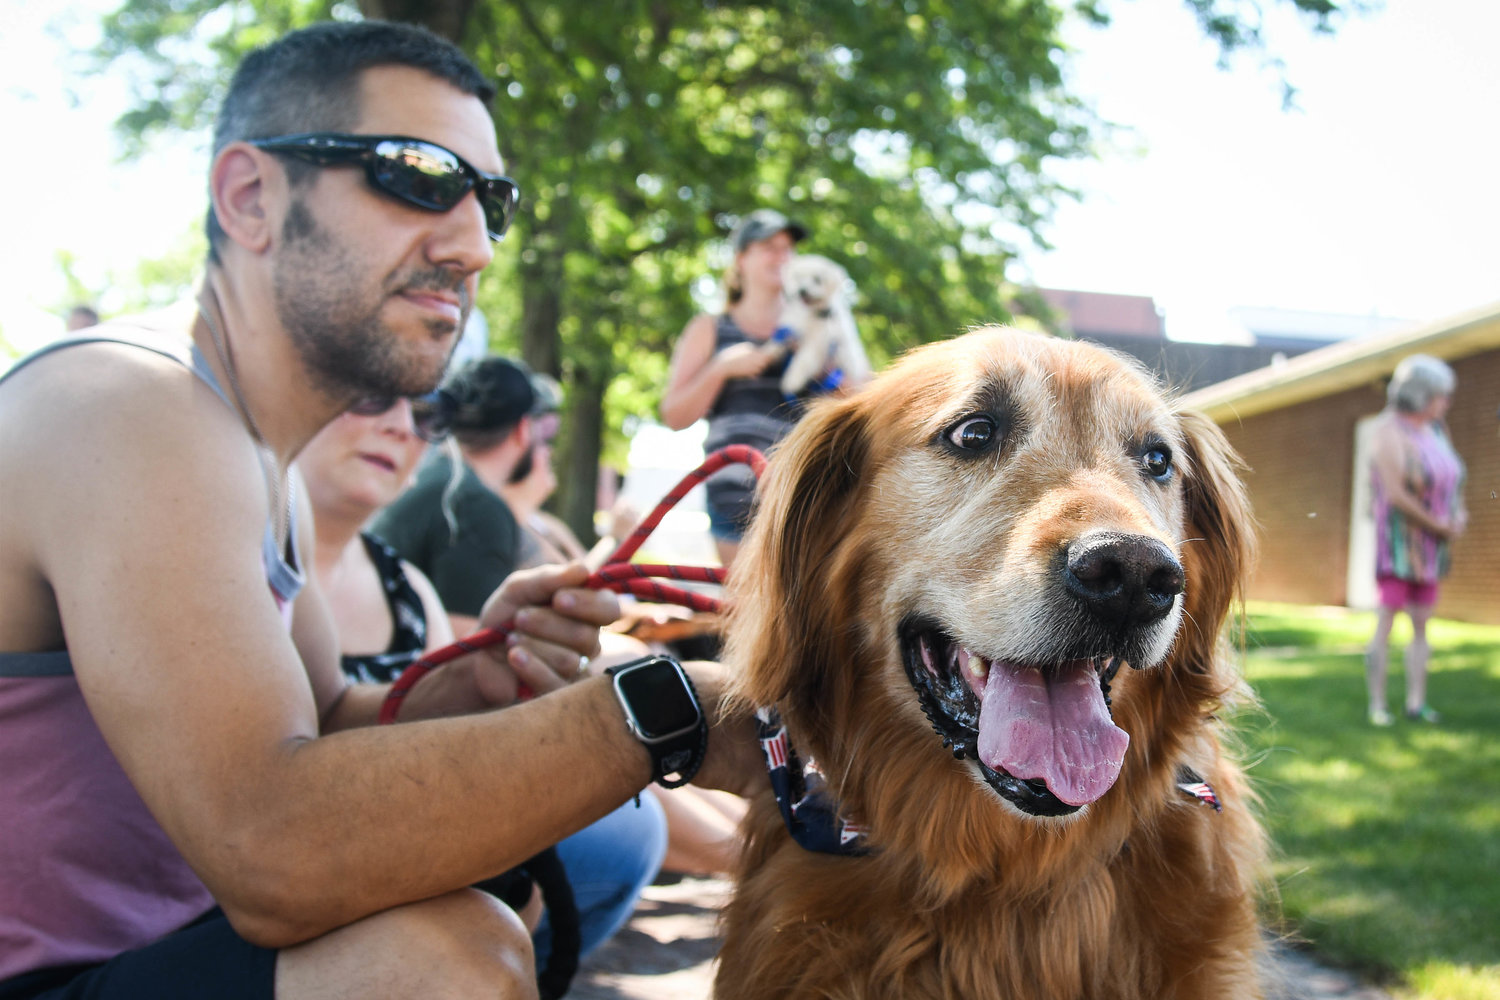 NOT SO RUFF — Buddy, a golden retreiver, sits patiently with his owner, Ryan, during a dog show hosted by the Herkimer County Humane Society on Saturday at Central Plaza in Ilion. The show was part of a long list of events hosted during Ilion Days 2022 last week.